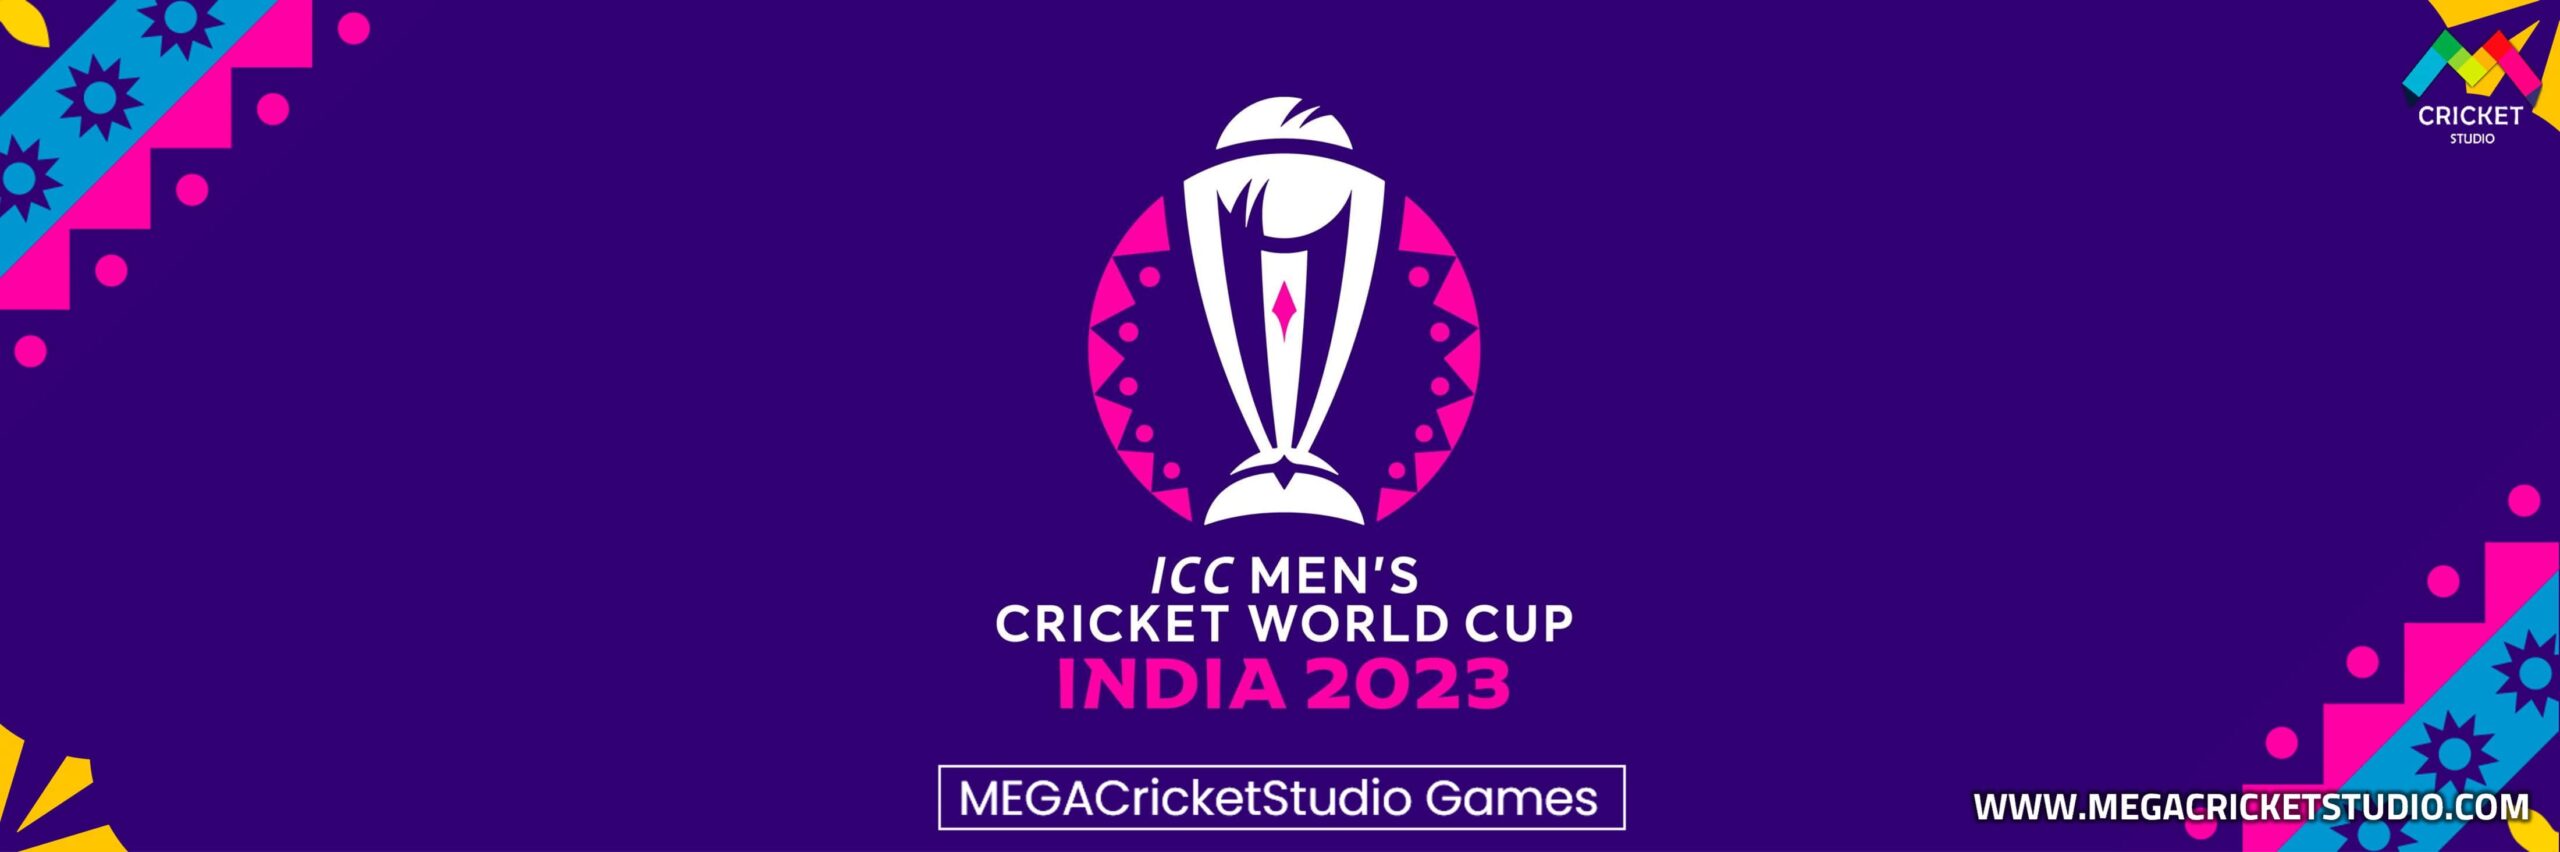 icc-cricket-world-cup-2023-patch-ea-cricket-07.png-min